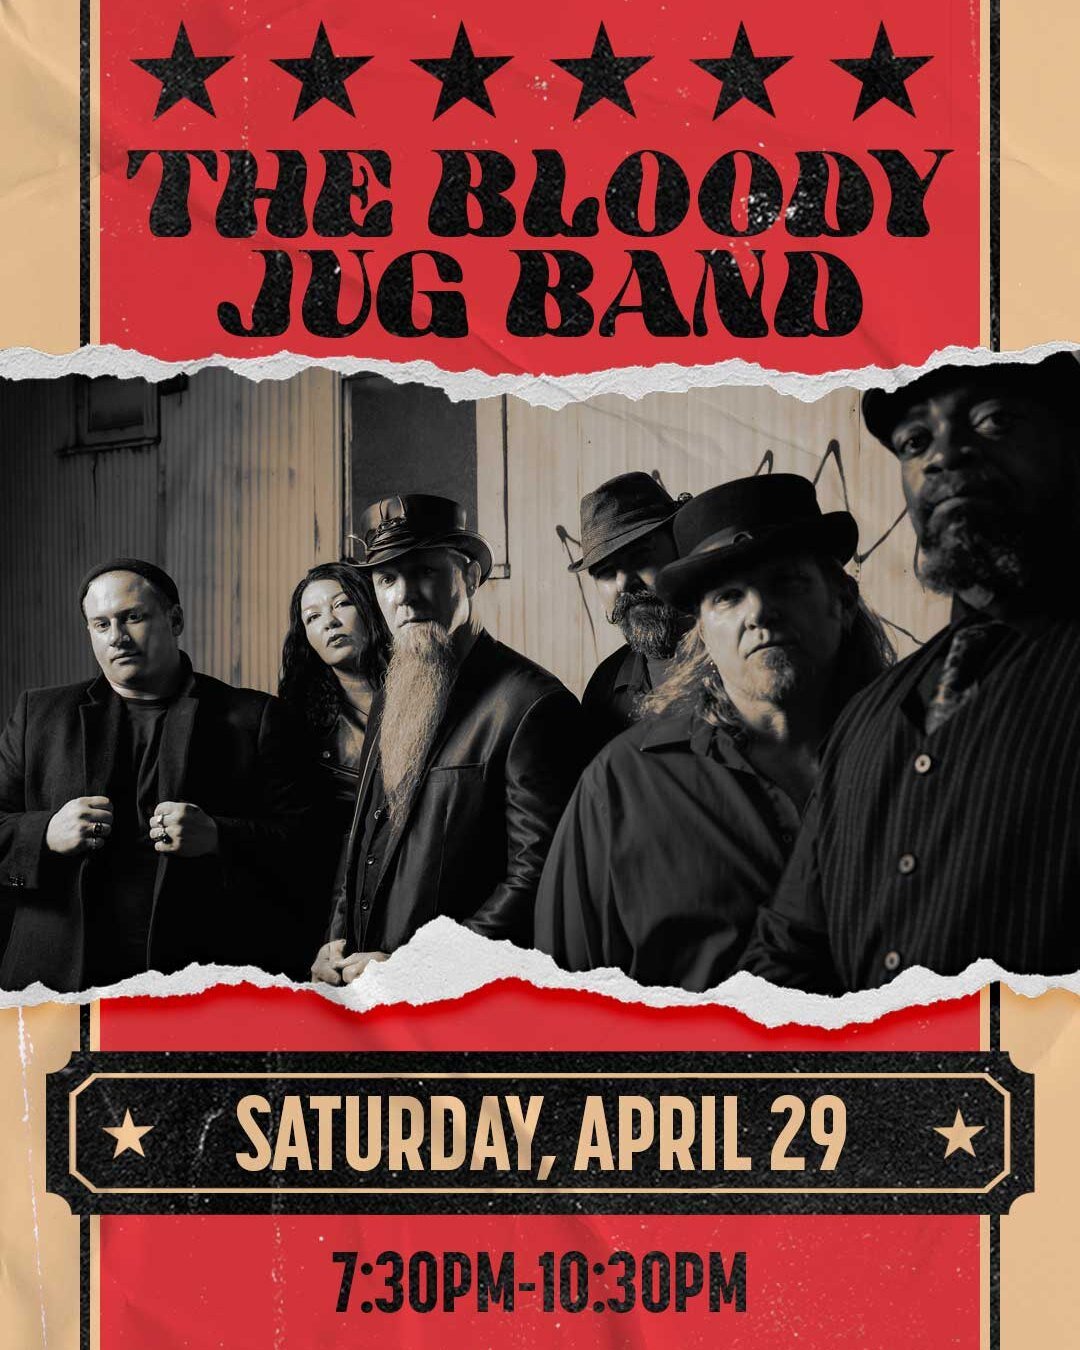 This SATURDAY at @johnnysother from 7:30-10:30pm!!! #jamboreetime #theBJB